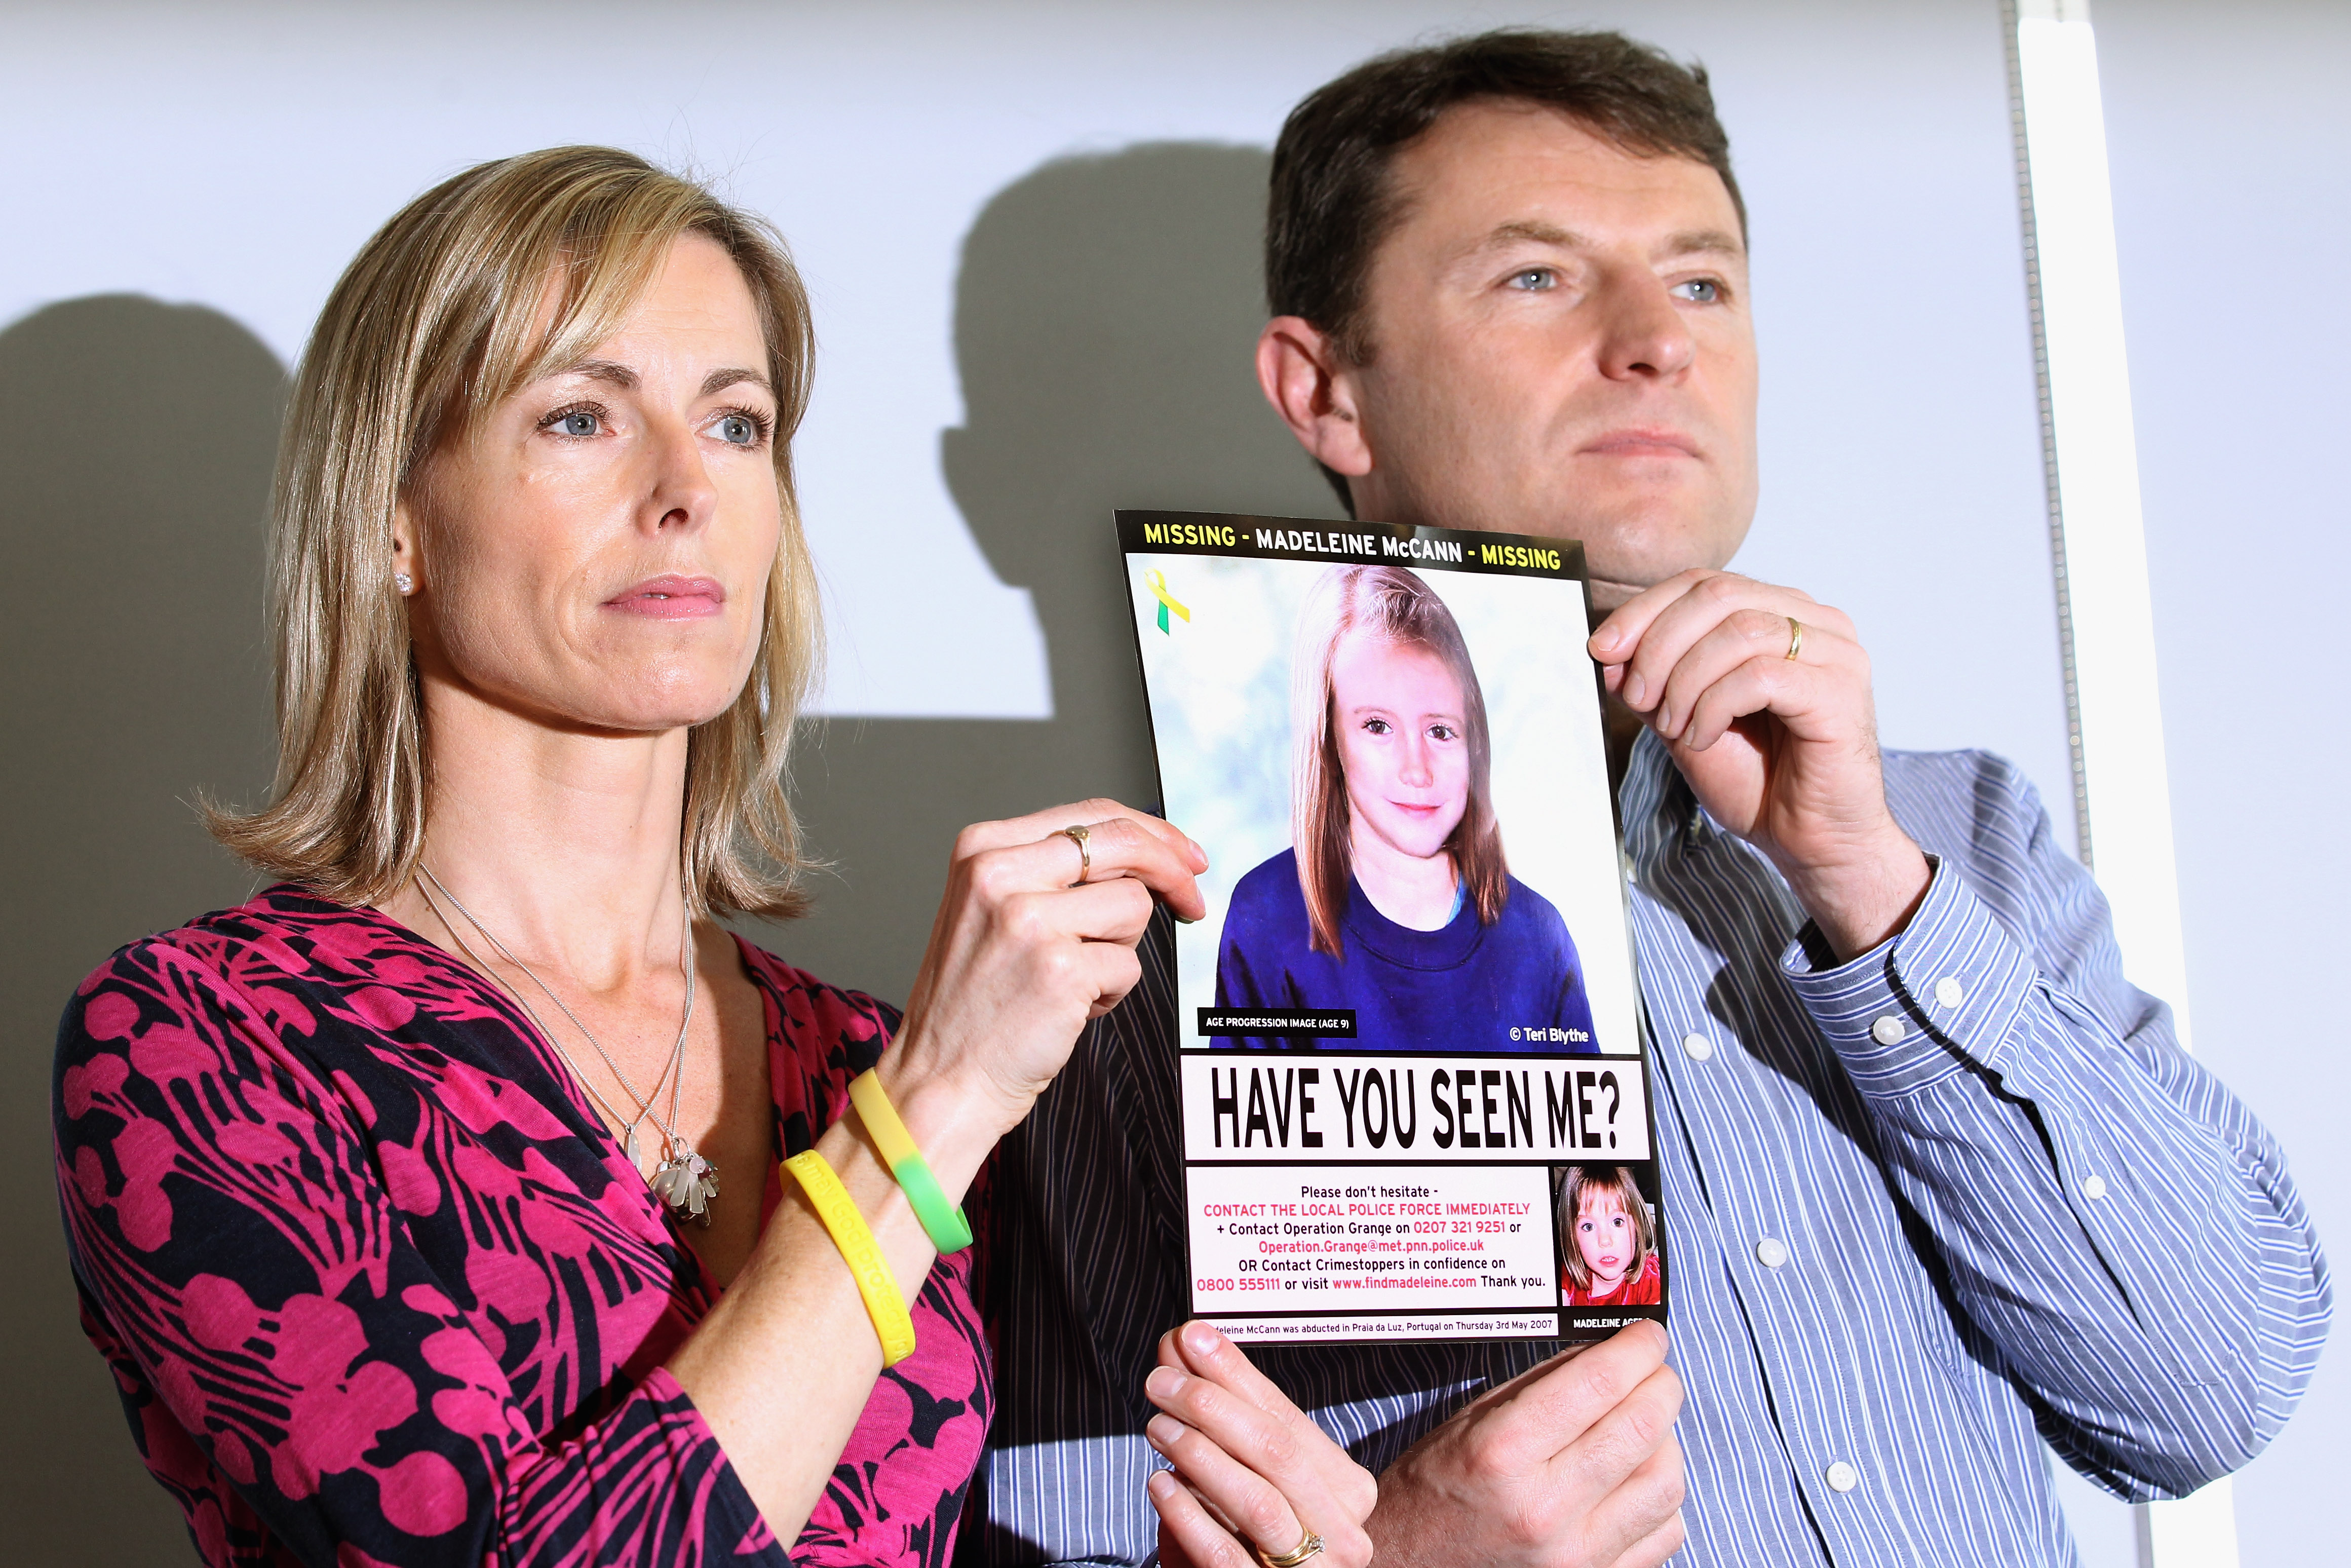 LONDON, ENGLAND - MAY 02:  Kate and Gerry McCann hold an age-progressed police image of their daughter during a news conference to mark the 5th anniversary of the disappearance of Madeleine McCann, on May 2, 2012 in London, England. The McCann's today stated that there is "no doubt" that authorities will re-open the investigation into their daughter's disappearance. Three-year-old Madeleine went missing while on holiday with her parents in the Algarve region of Portugal in May 2007.  (Photo by Dan Kitwood/Getty Images)